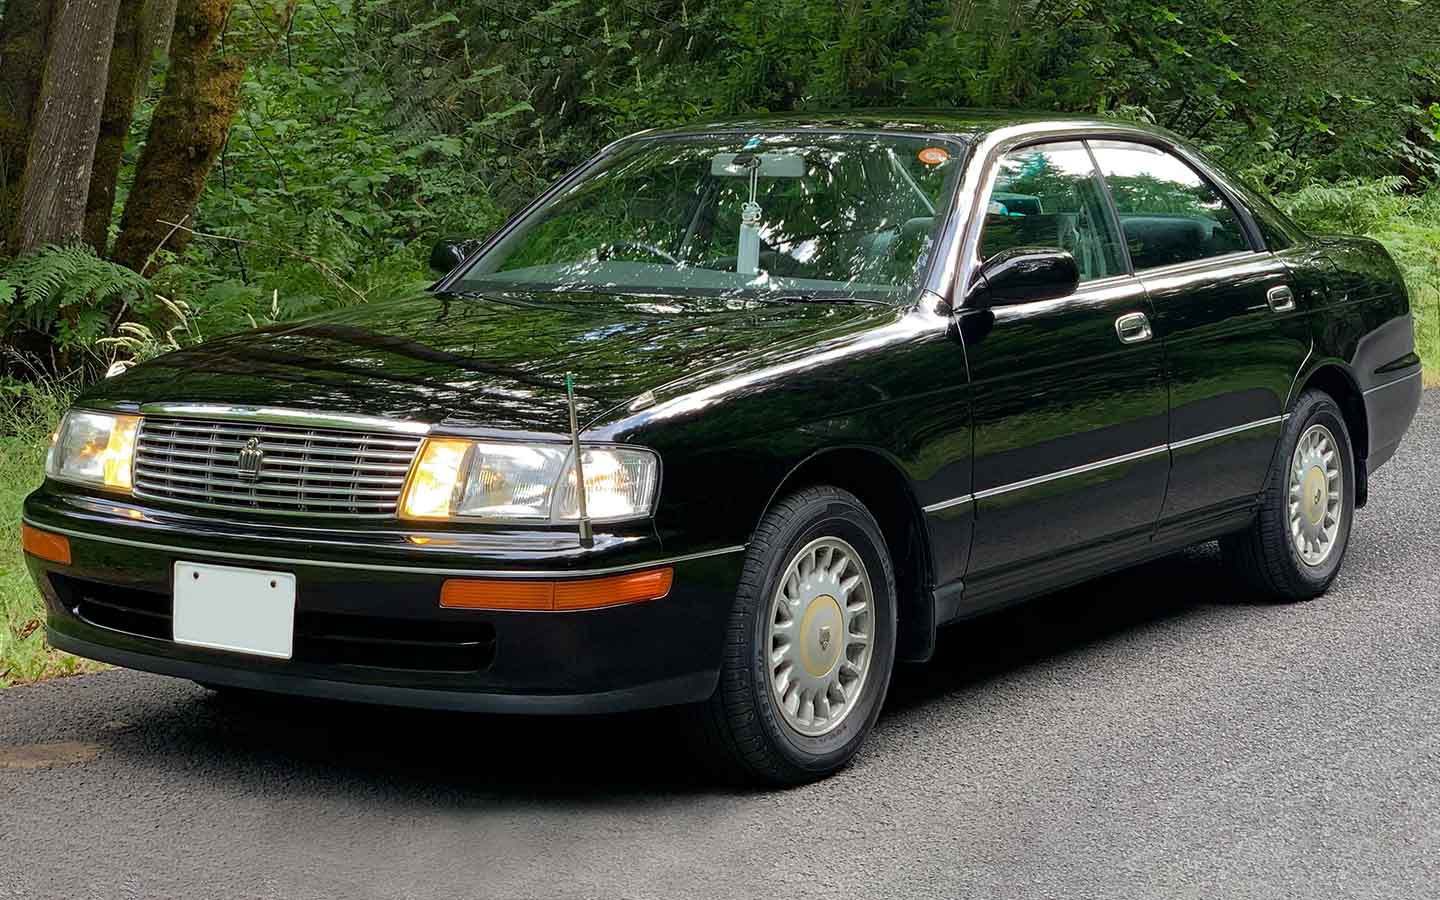 Ninth generation Toyota Crown 1991 was released with only hardtop variant revision